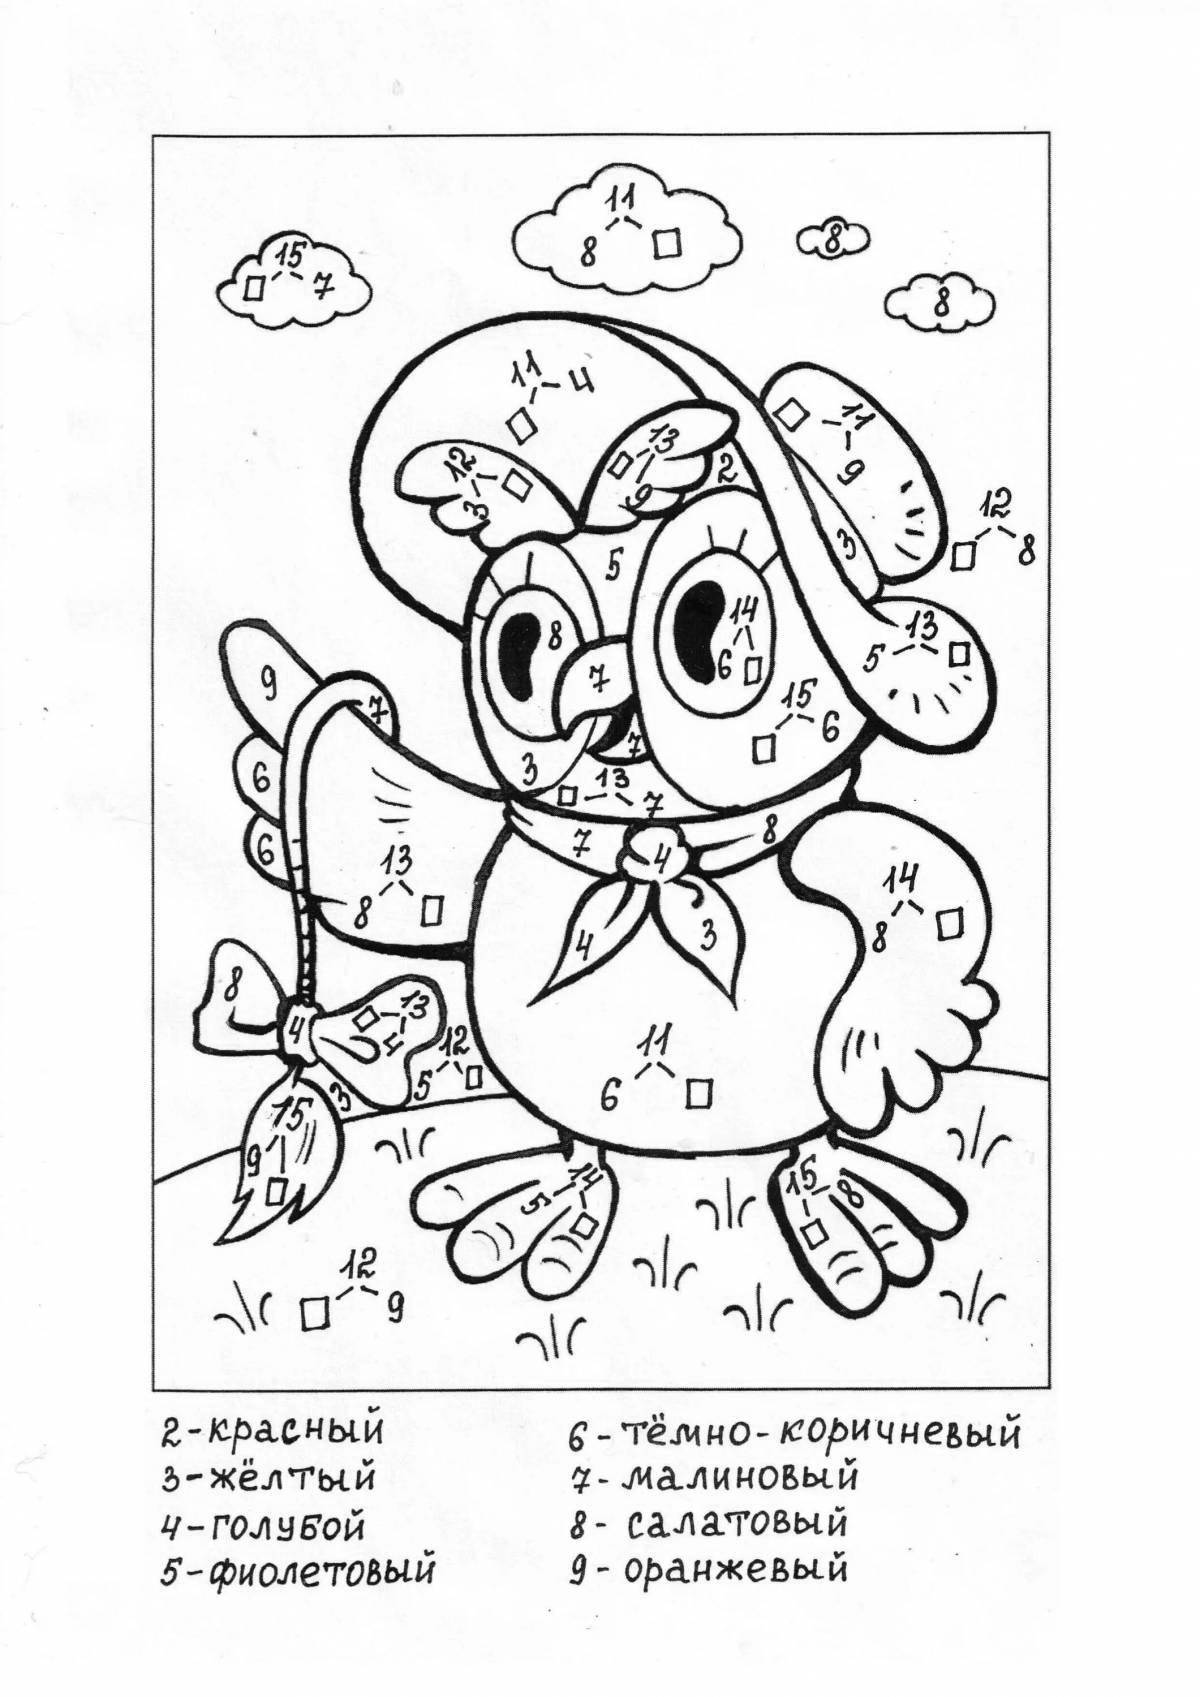 Fun math coloring book with examples